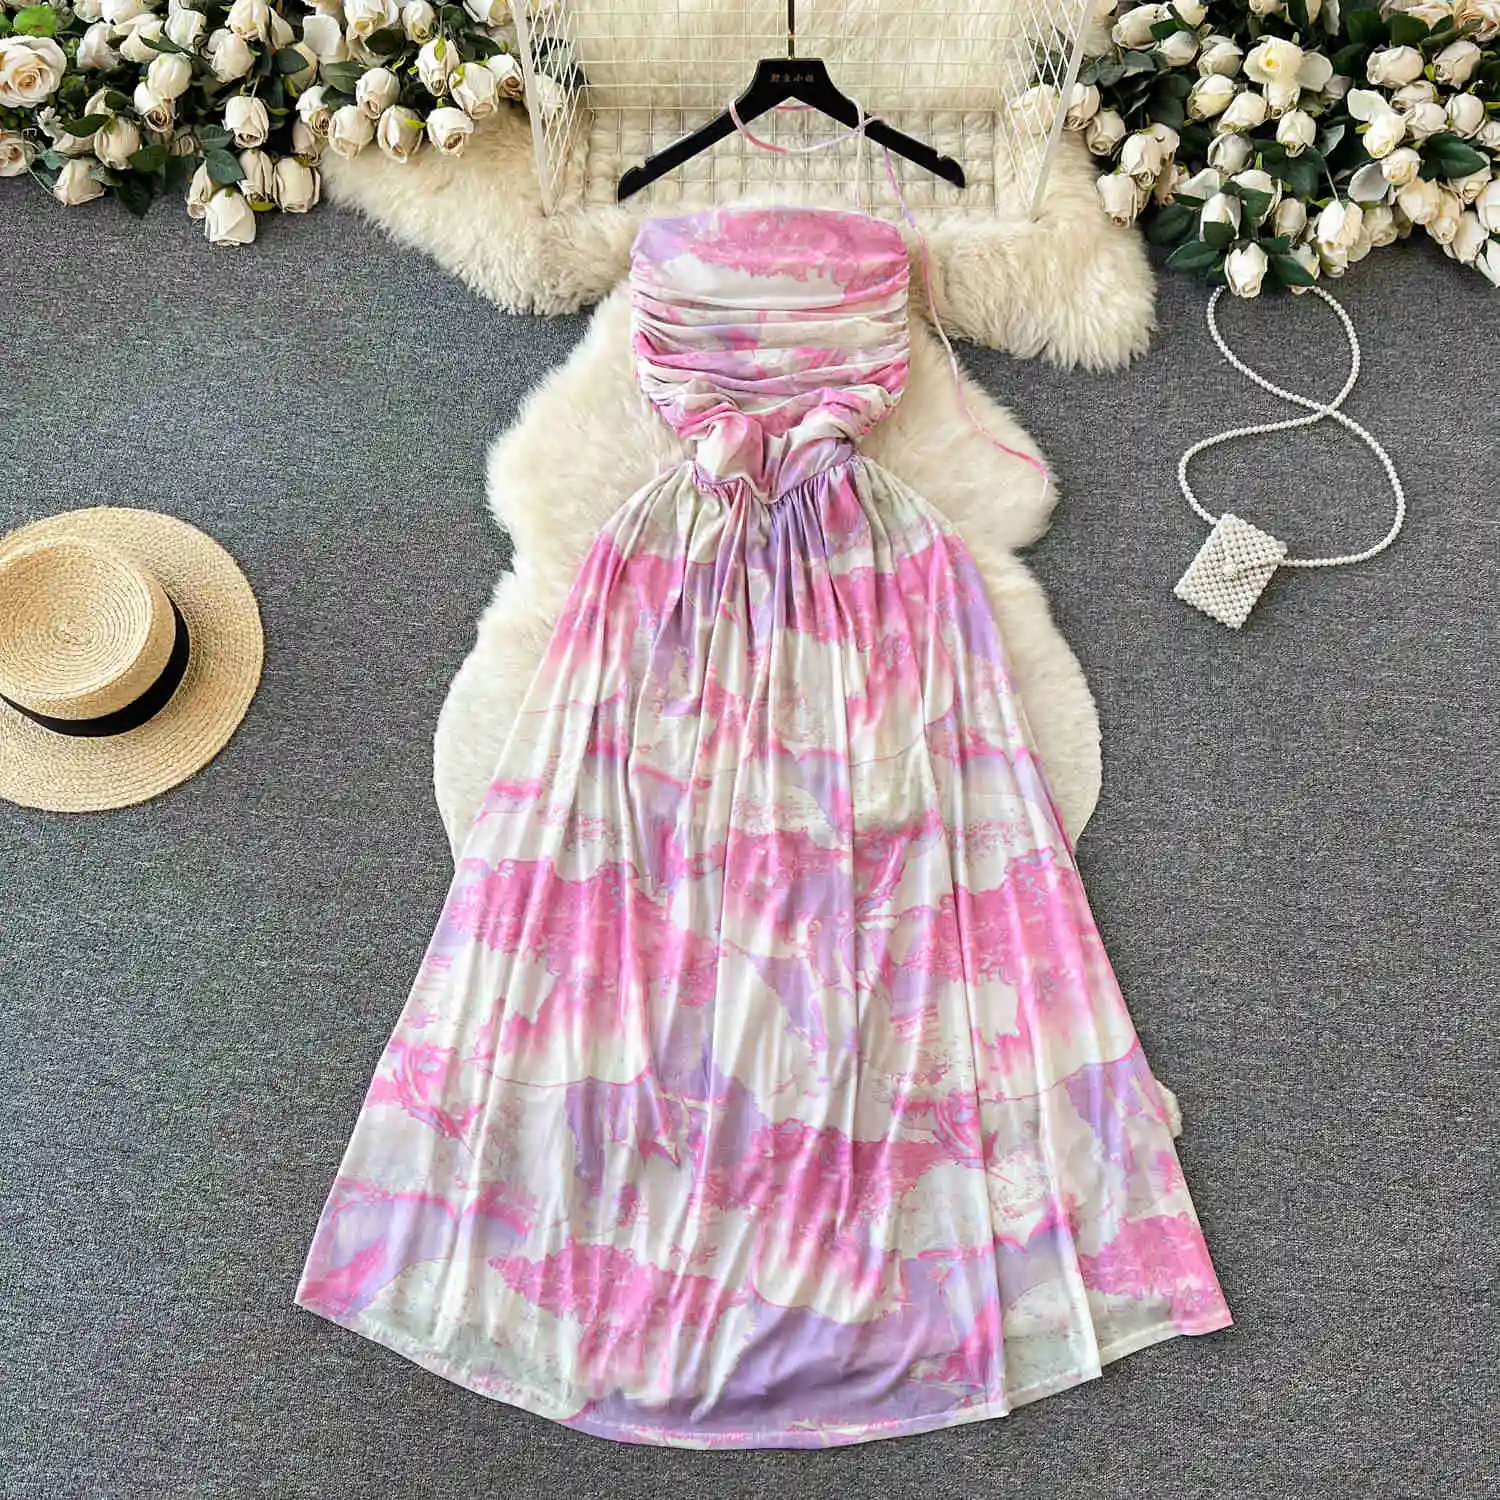 

Beach Style Tie Dyed Print Dress for Women Summer Sexy Strapless Sleeveless Slim High Waist A Line Pleated Long Holiday Dress